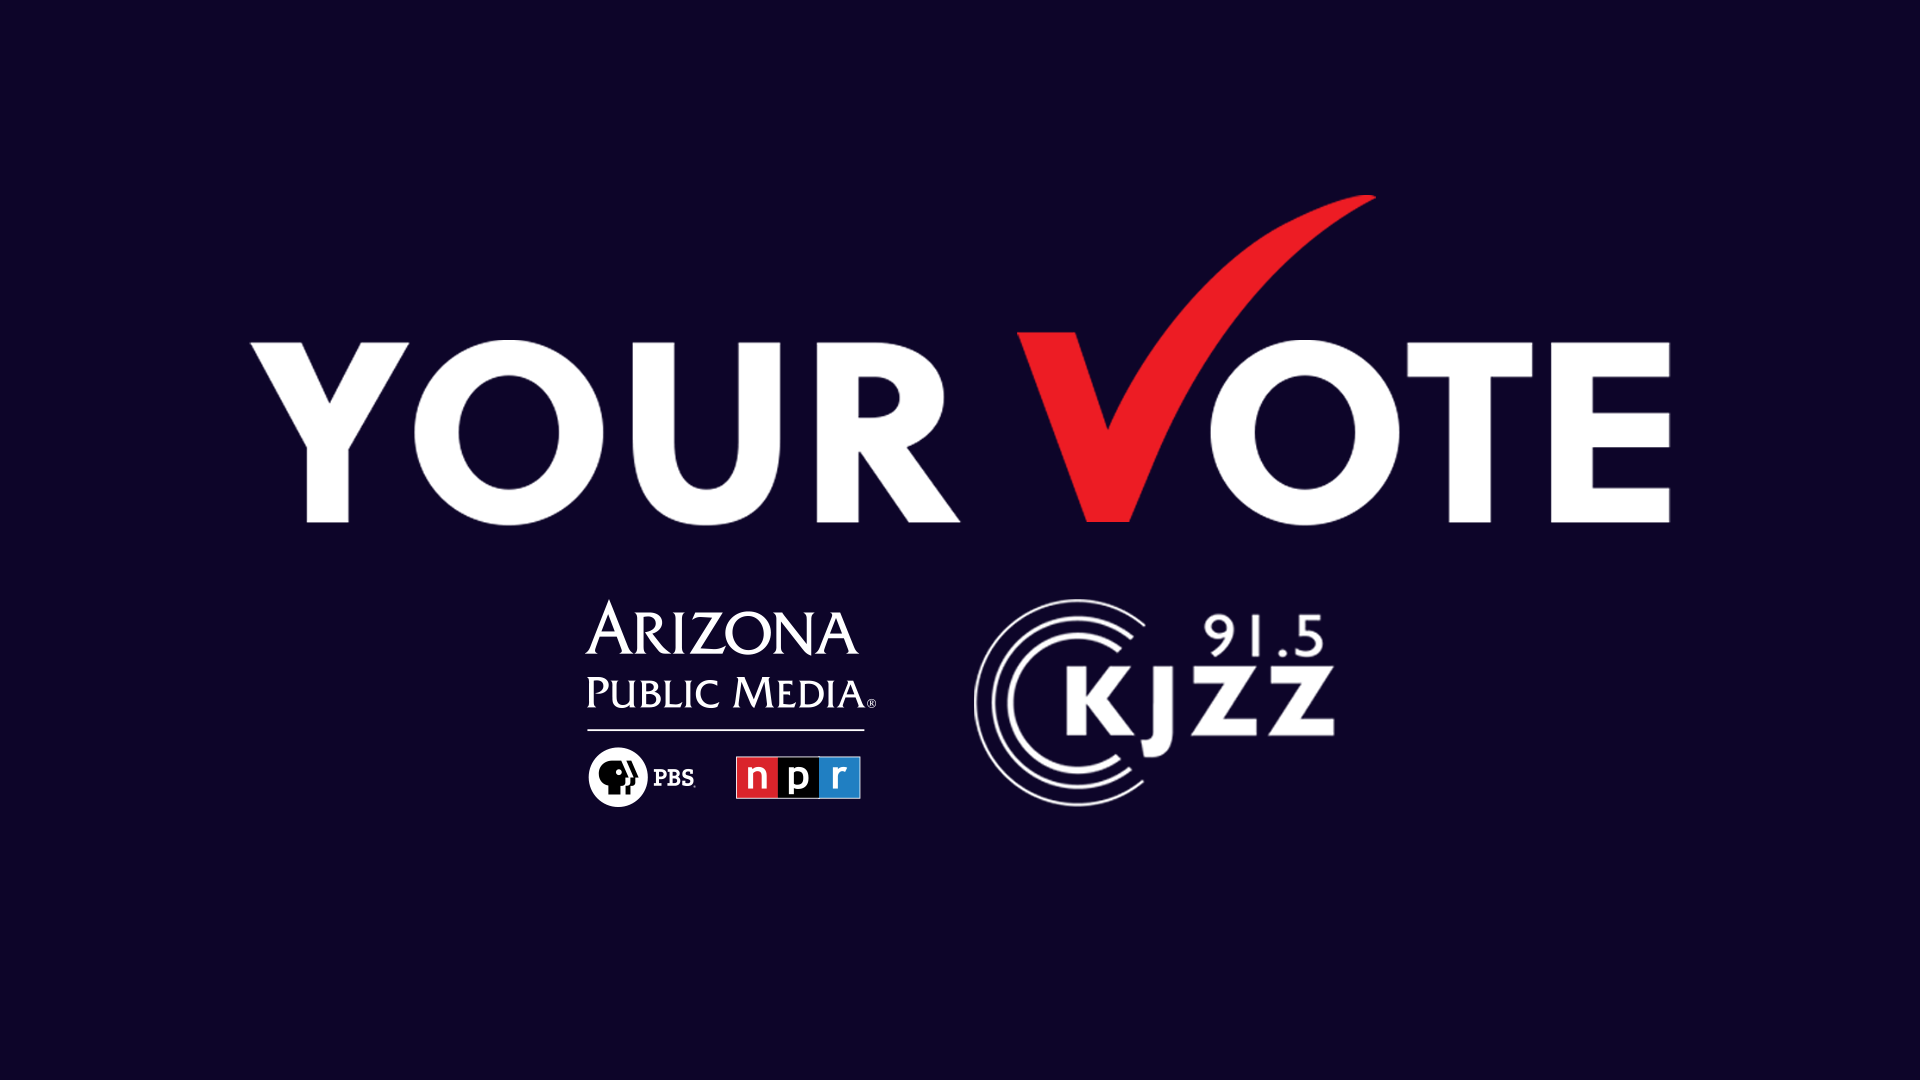 Arizona Public Media is teaming up with KJZZ in Phoenix to cover the most consequential races in this year's election. Our reporters will look at the issues shaping the future of Arizona.